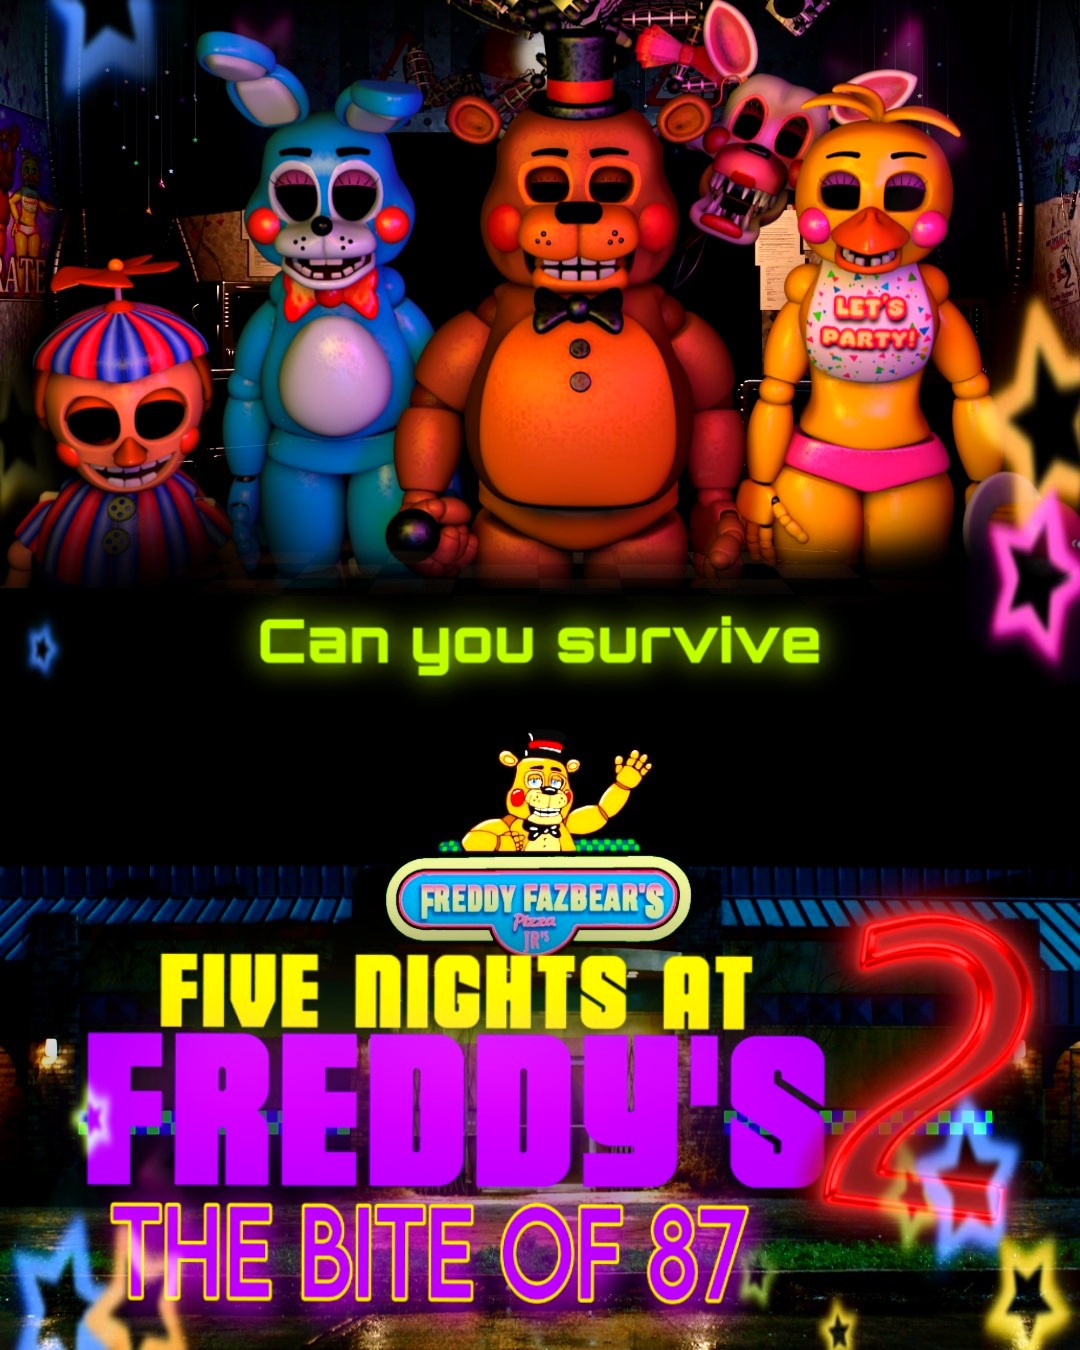 Fnaf 2 Movie its on the WAY! by beny2000 on DeviantArt